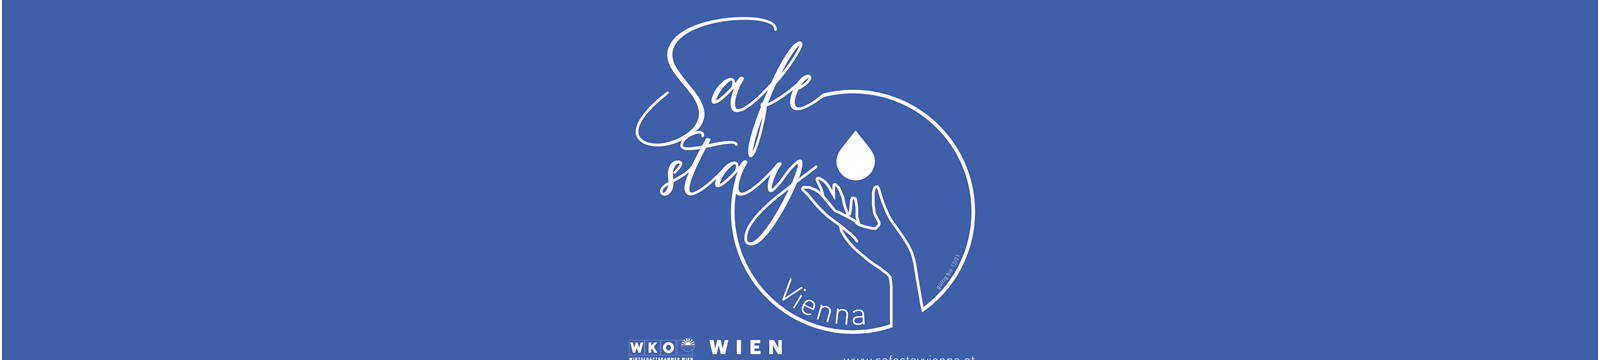 Safe Stay at the Grand Hotel Wien / Initiative of the Vienna Economic Chamber’s professional group of the hotel industry in cooperation with the Vienna Tourist Board